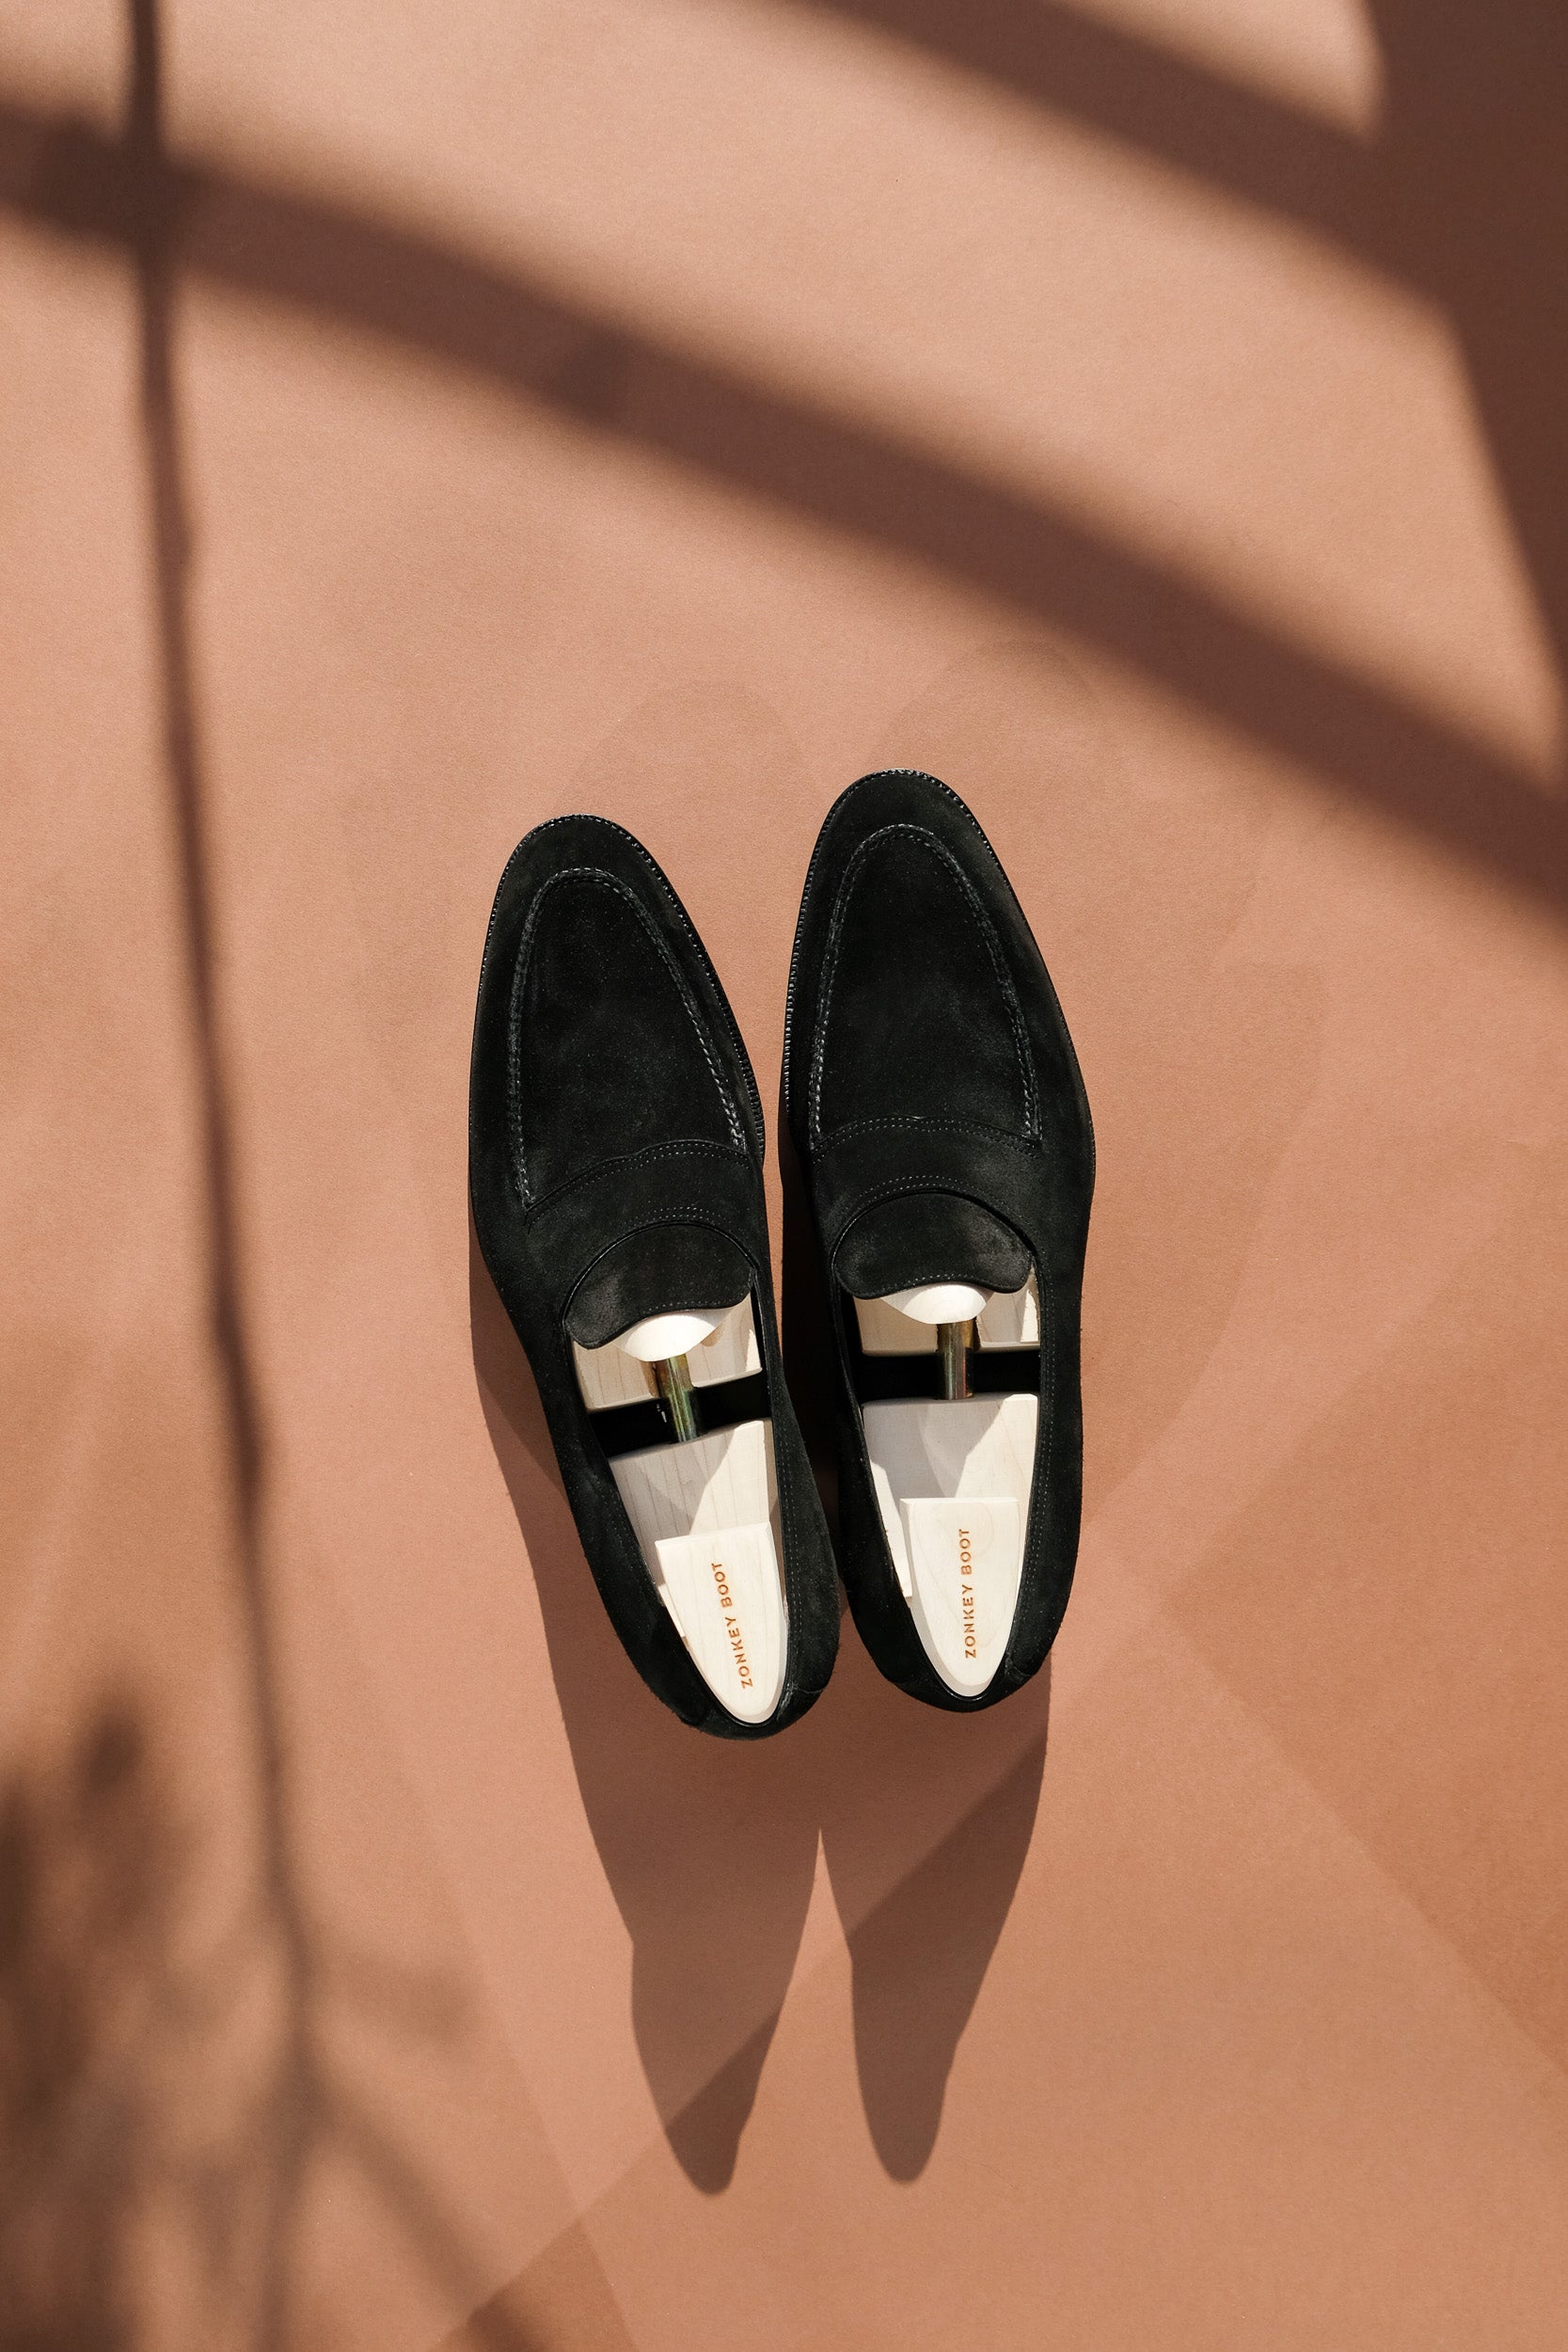 Zonkey Boot hand welted loafers on the Classic last from black suede